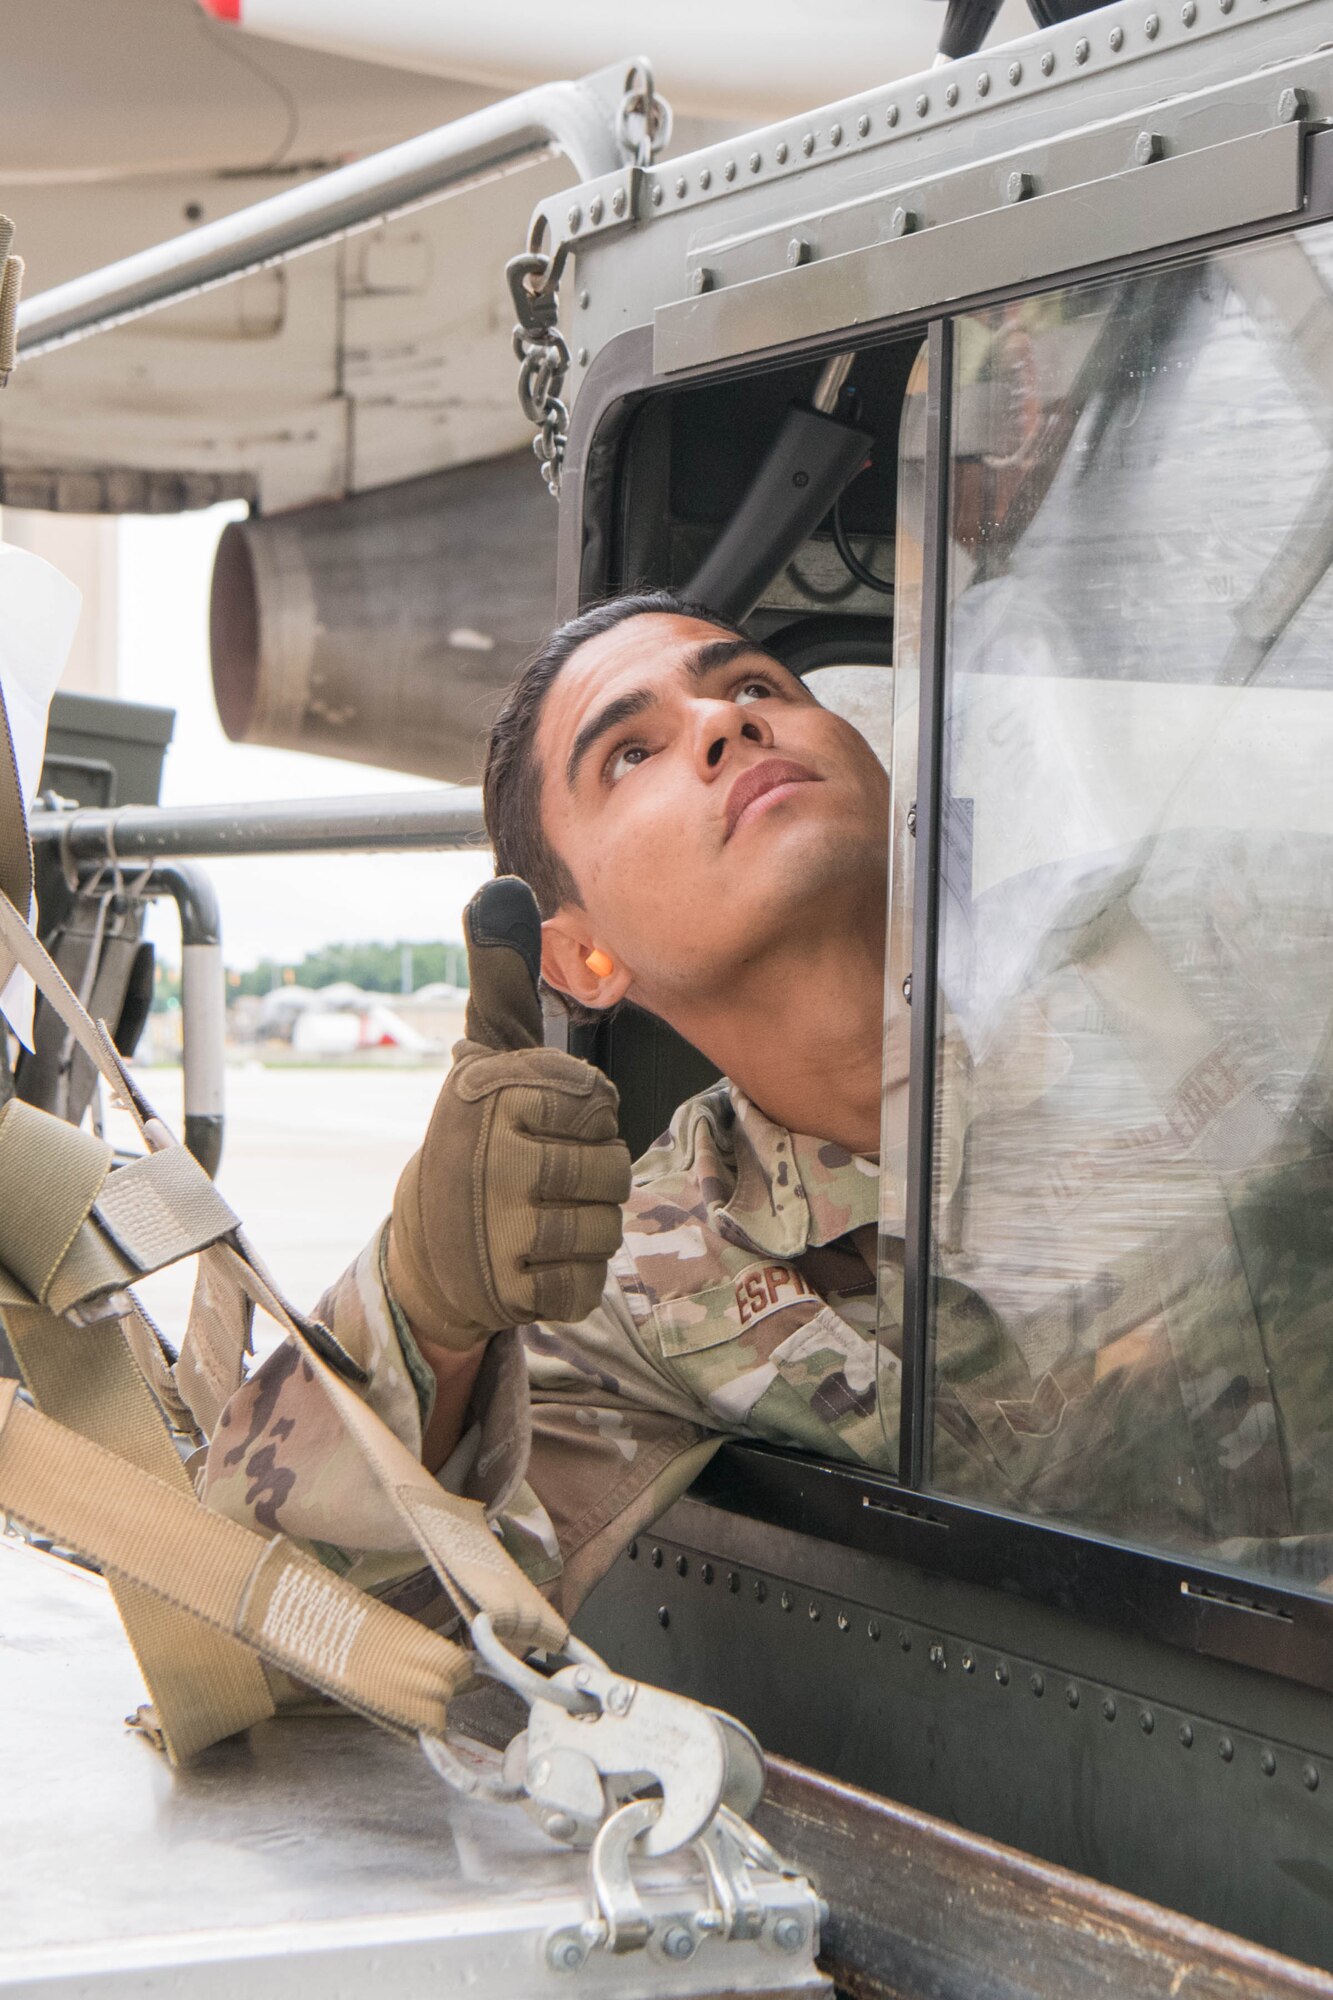 Staff Sgt. Manuel Espino, 436th Aerial Port Squadron ramp services supervisor, raises a K-loader up to an aircraft bound for Ukraine at Dover Air Force Base, Delaware, June 22, 2021. Missions like this demonstrate the U.S. commitment to Ukraine’s independence, sovereignty and territorial integrity.  (U.S. Air Force photo by Mauricio Campino)